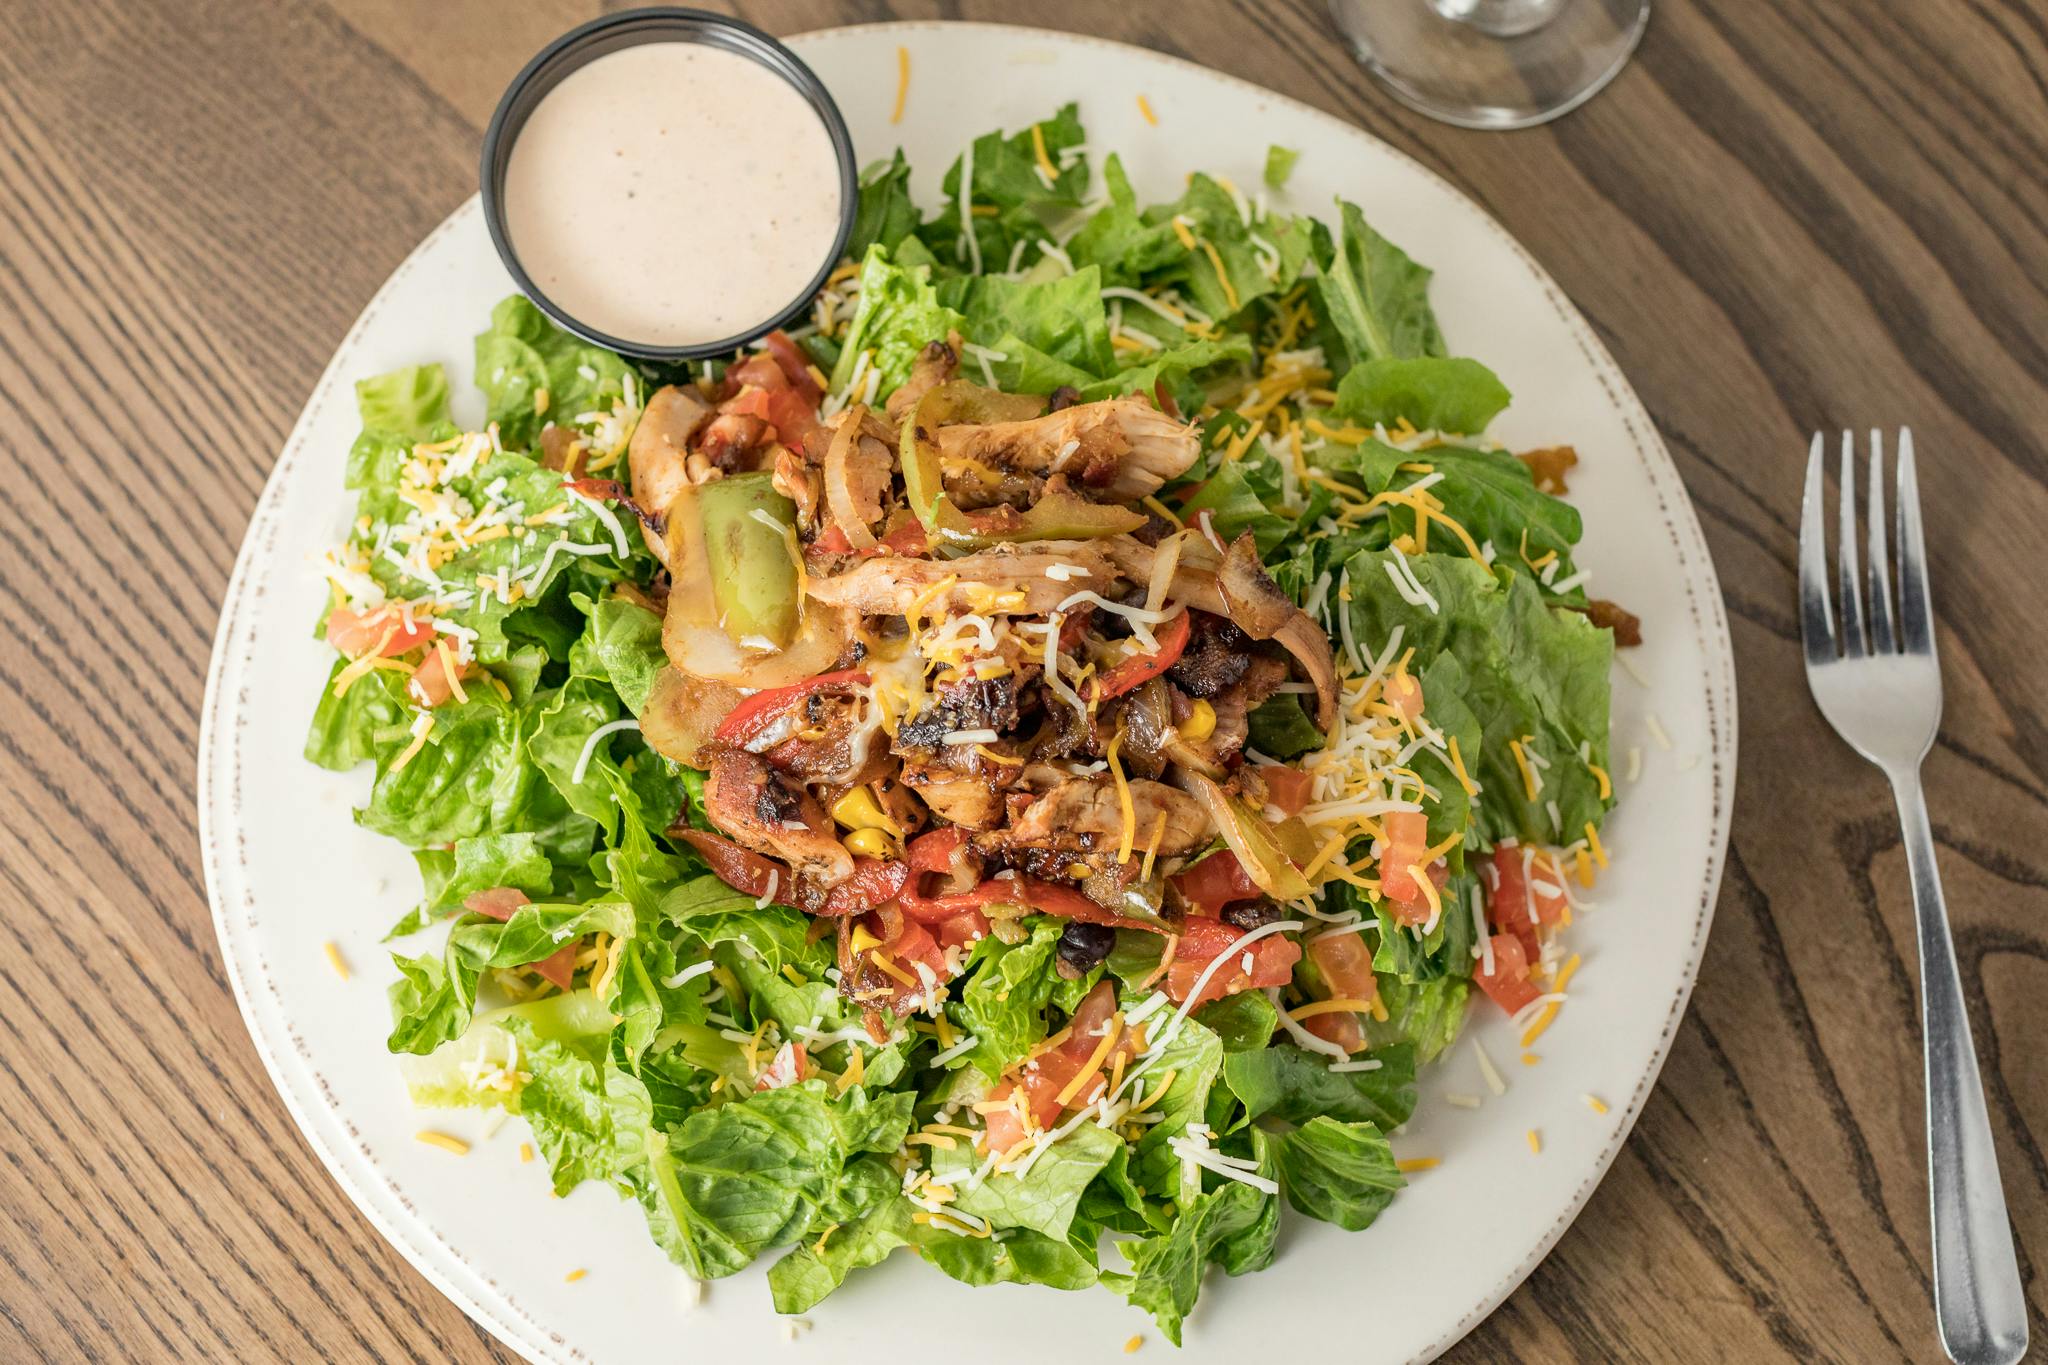 Applewood Bacon & Fajita Chicken Salad from Grizzly's Wood-Fired Grill in Eau Claire, WI